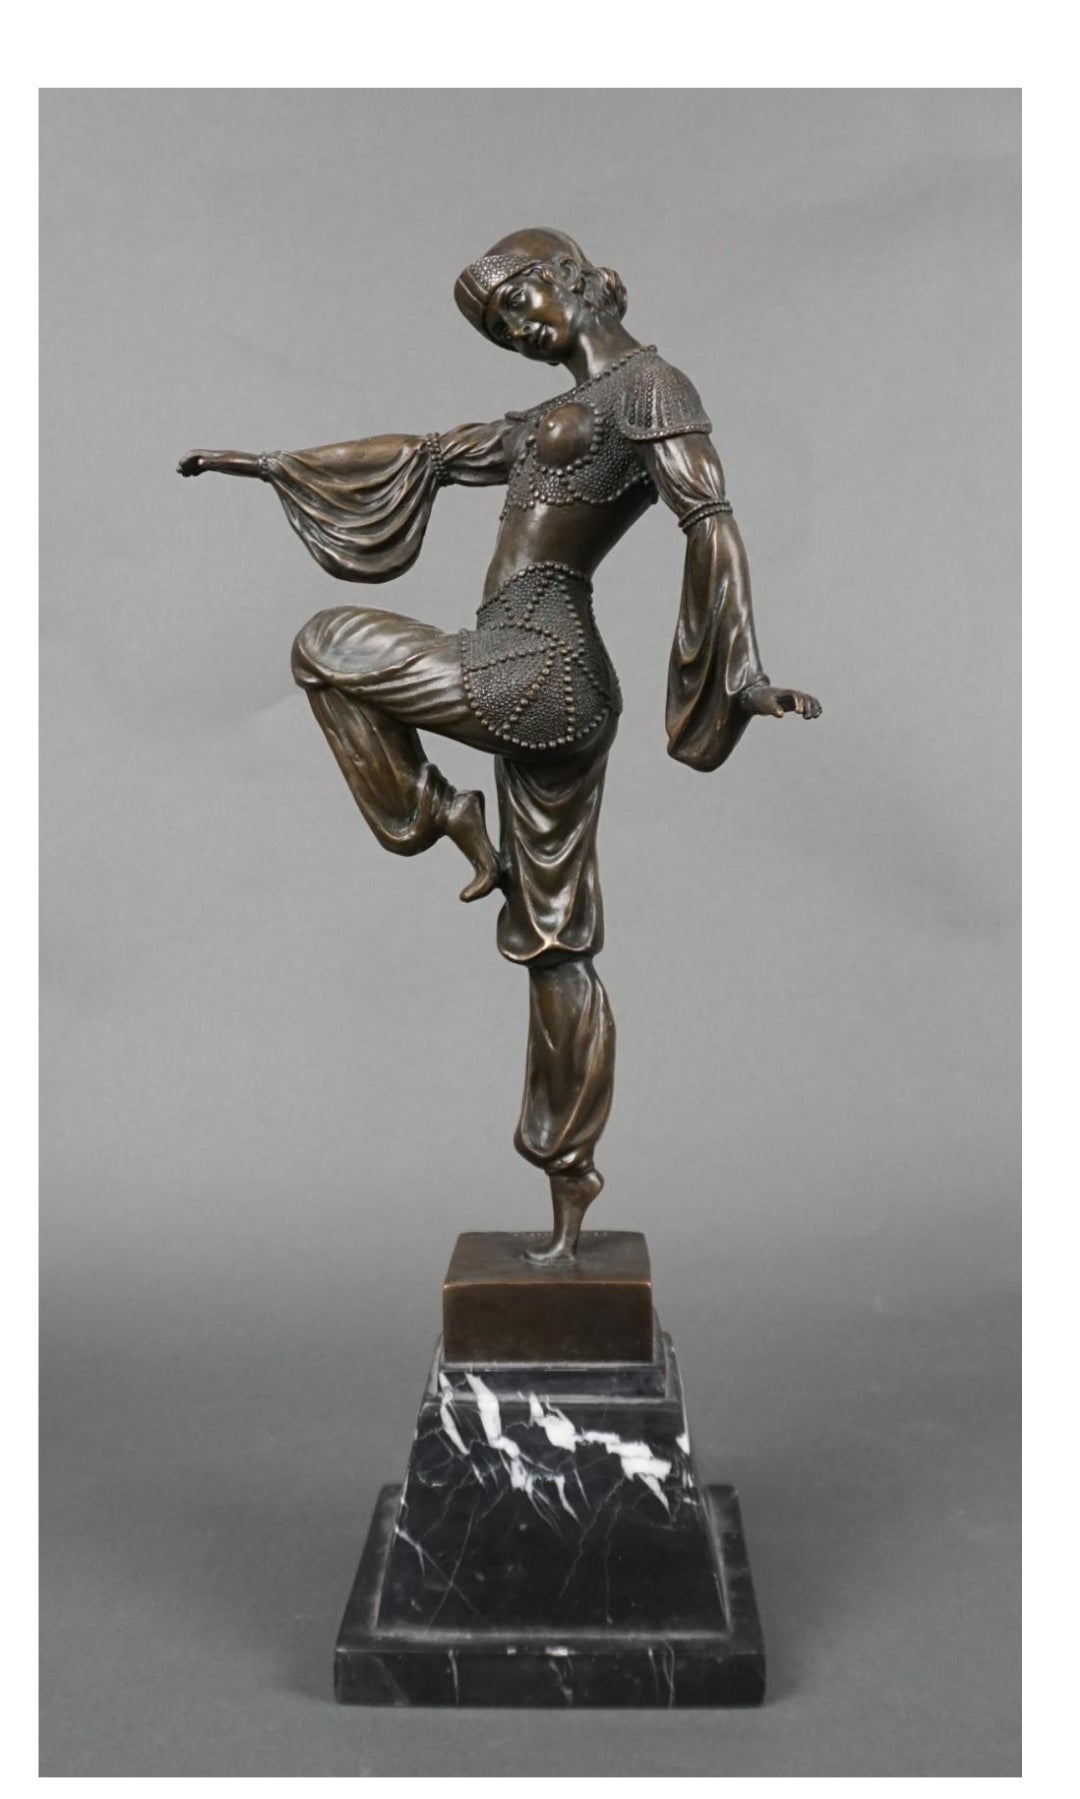 Demetre Haralamb Chiparus (French/Romanian 1886 - 1947), Art Deco Dancers, Bronze Sculpture On Marble Plinth.
Demétre H Chiparus Antique Bronze Art Deco Dancer.  Artist: Demétre Haralamb Chiparus was a Romanian Art Deco era sculptor who lived and